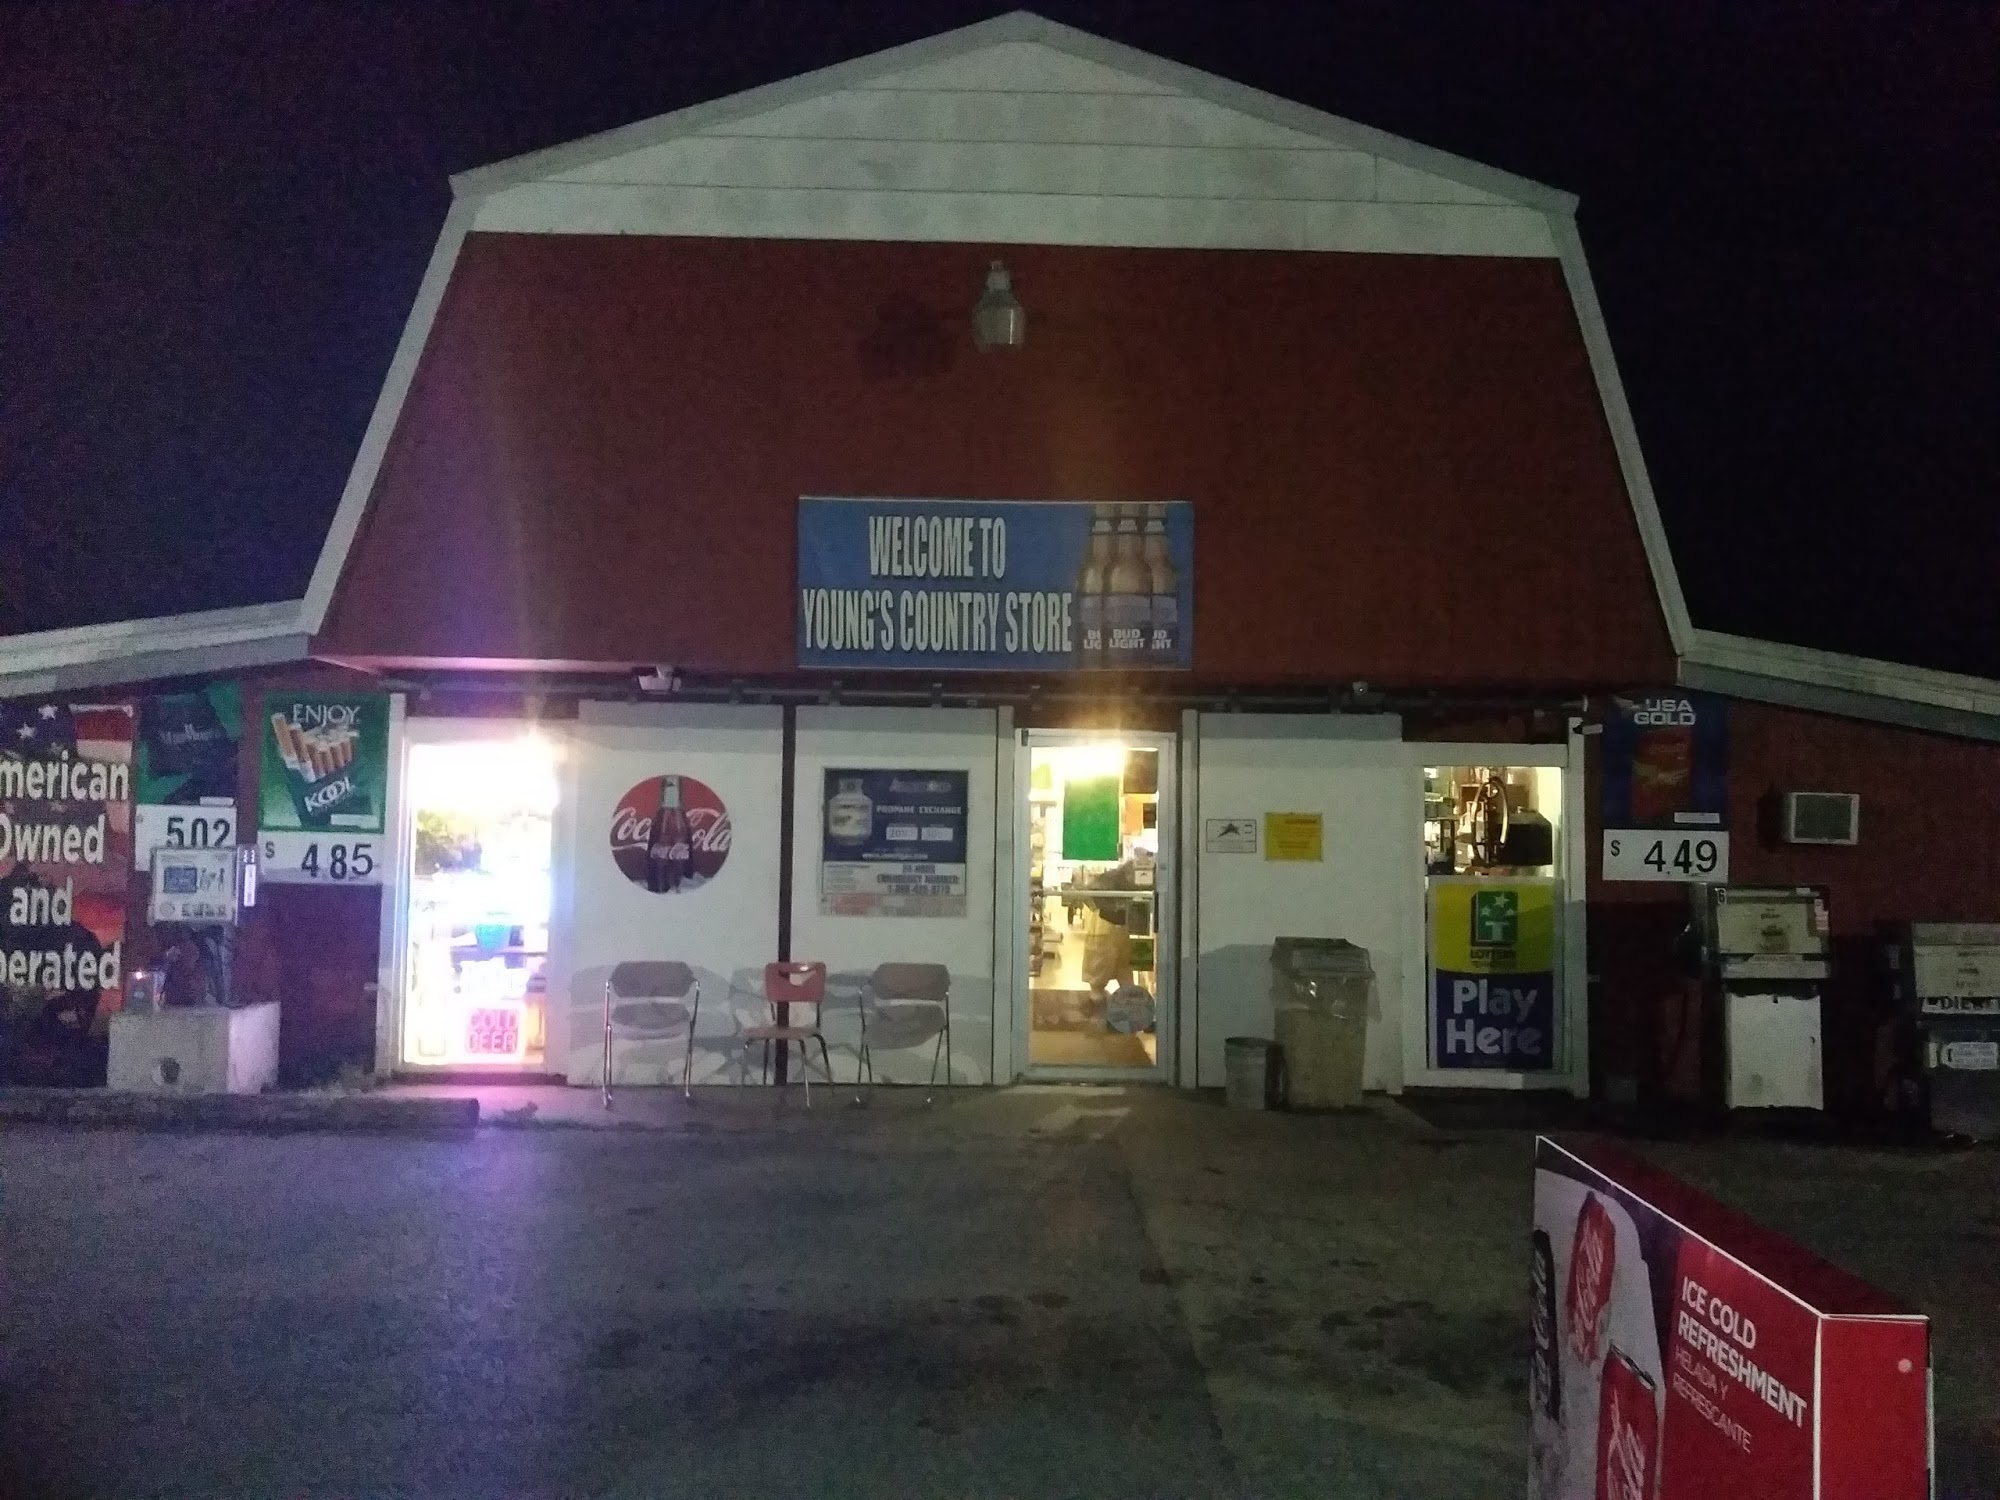 Young's Country Store